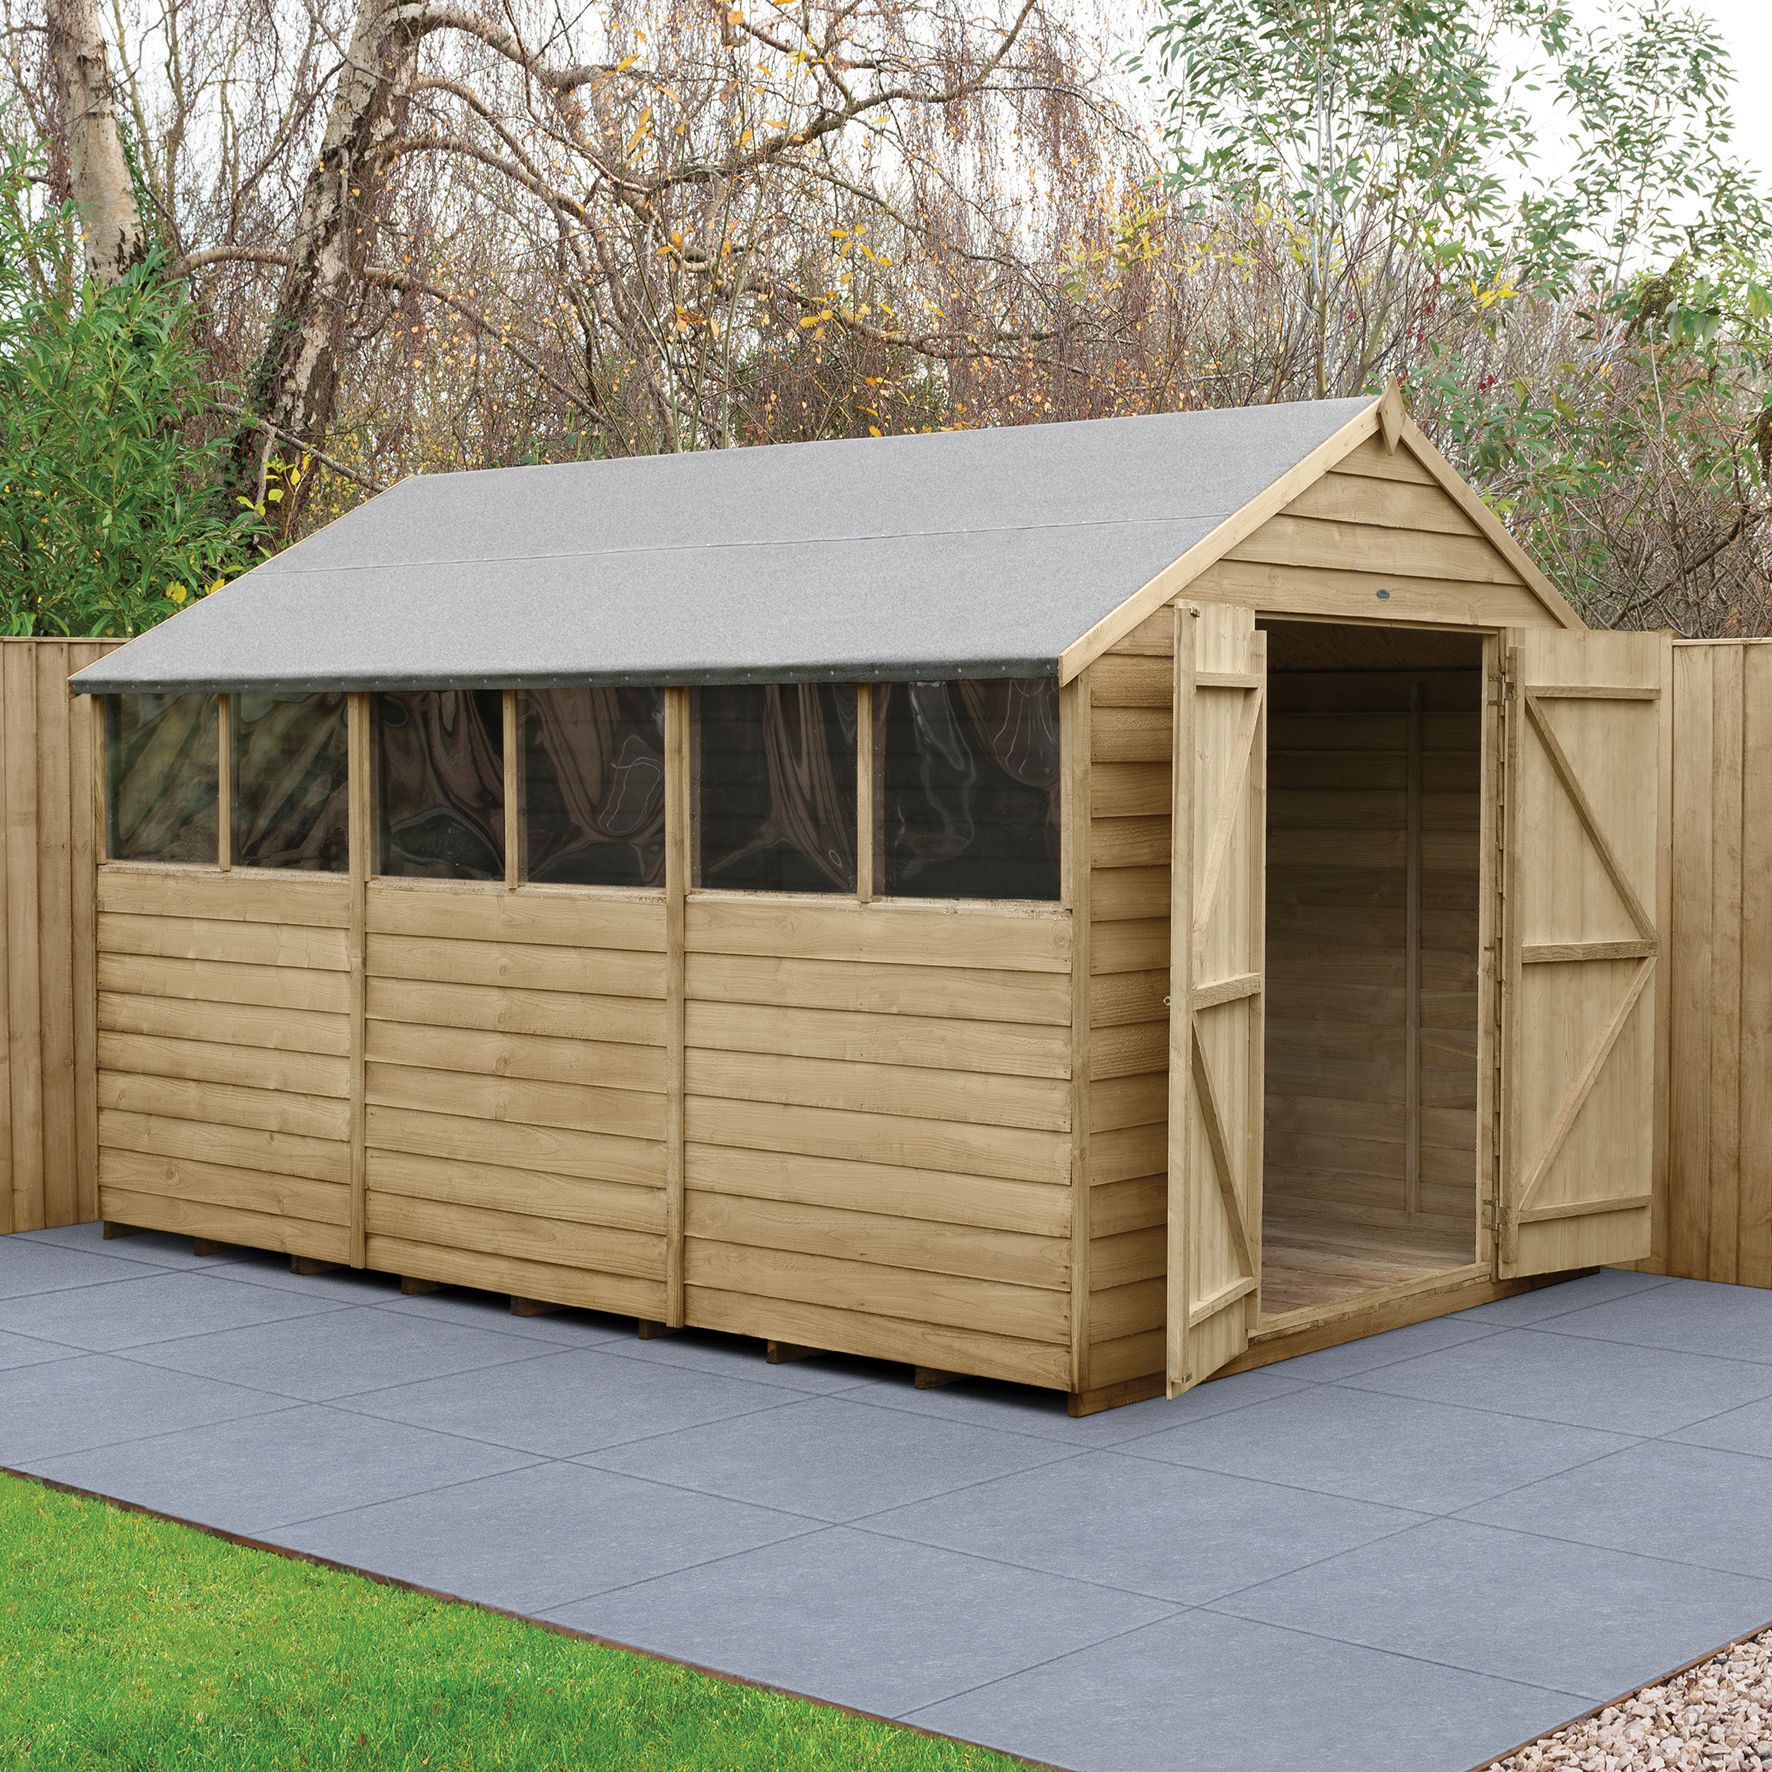 Image of Forest Garden 12 x 8ft Large Double Door Overlap Apex Pressure Treated Shed